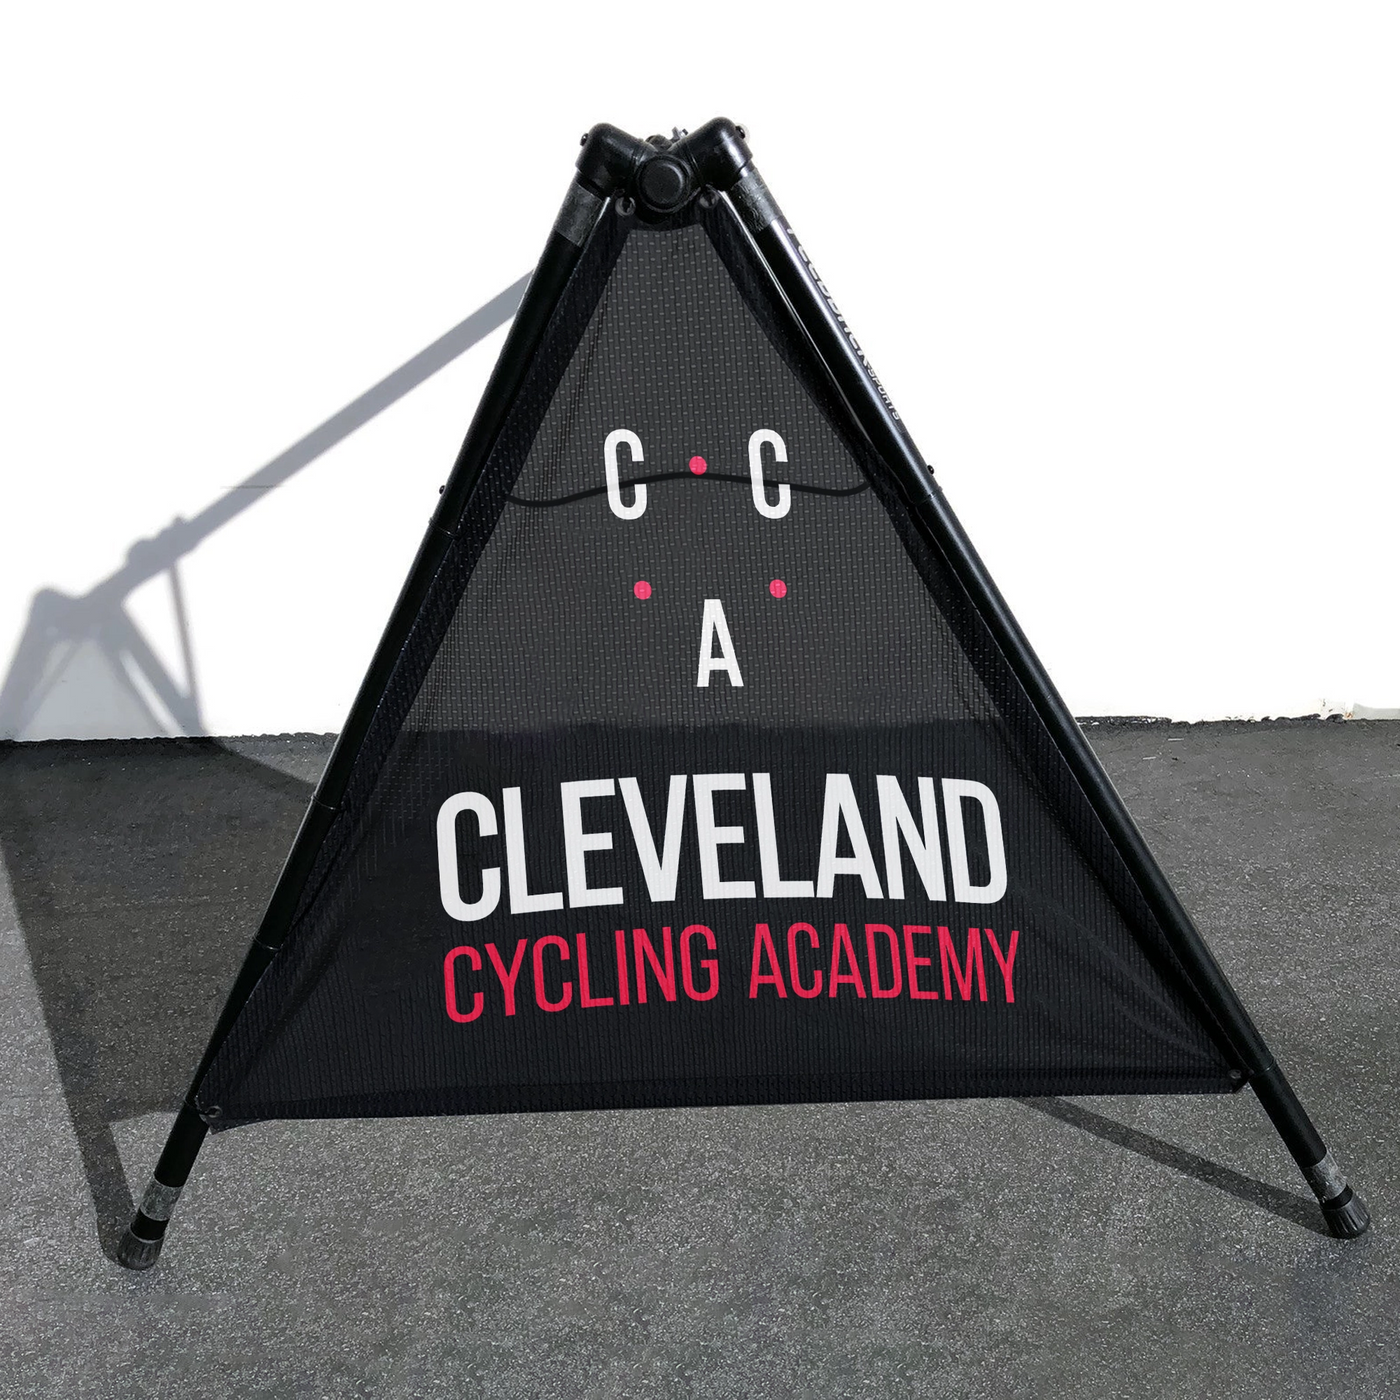 Cleveland Cycling Academy 2023 Bike Rack Banners (Set of 2 Mesh Banners)